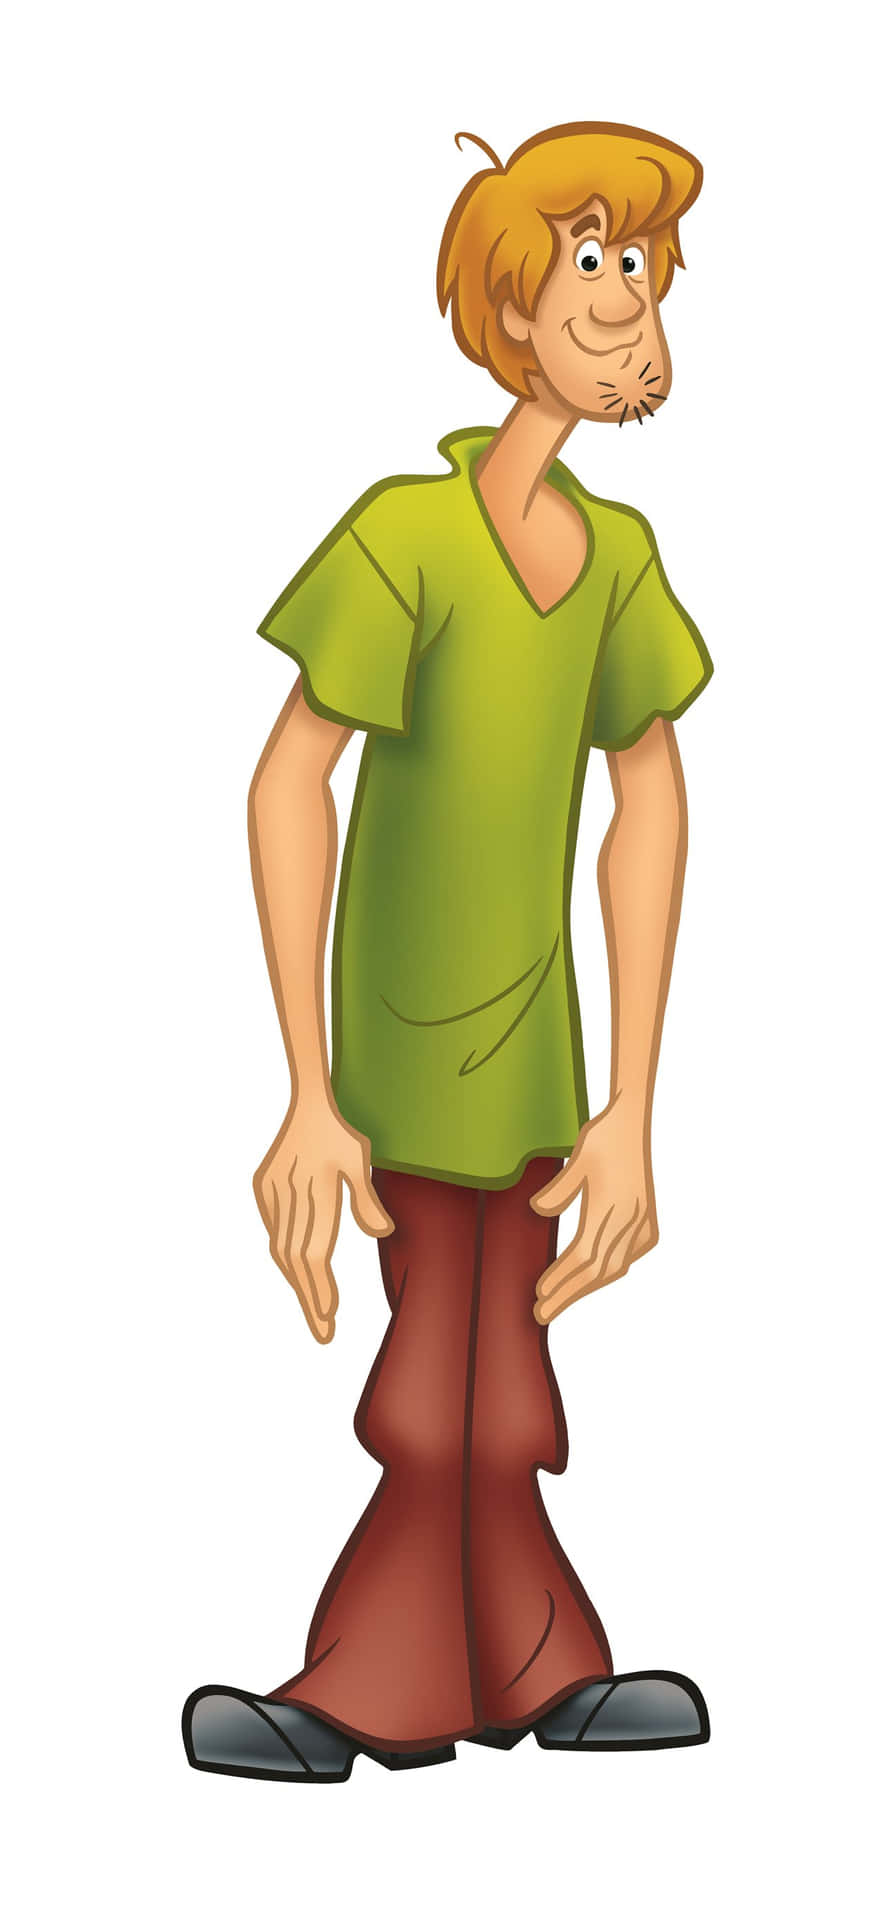 A Cartoon Character With A Green Shirt And Pants Wallpaper